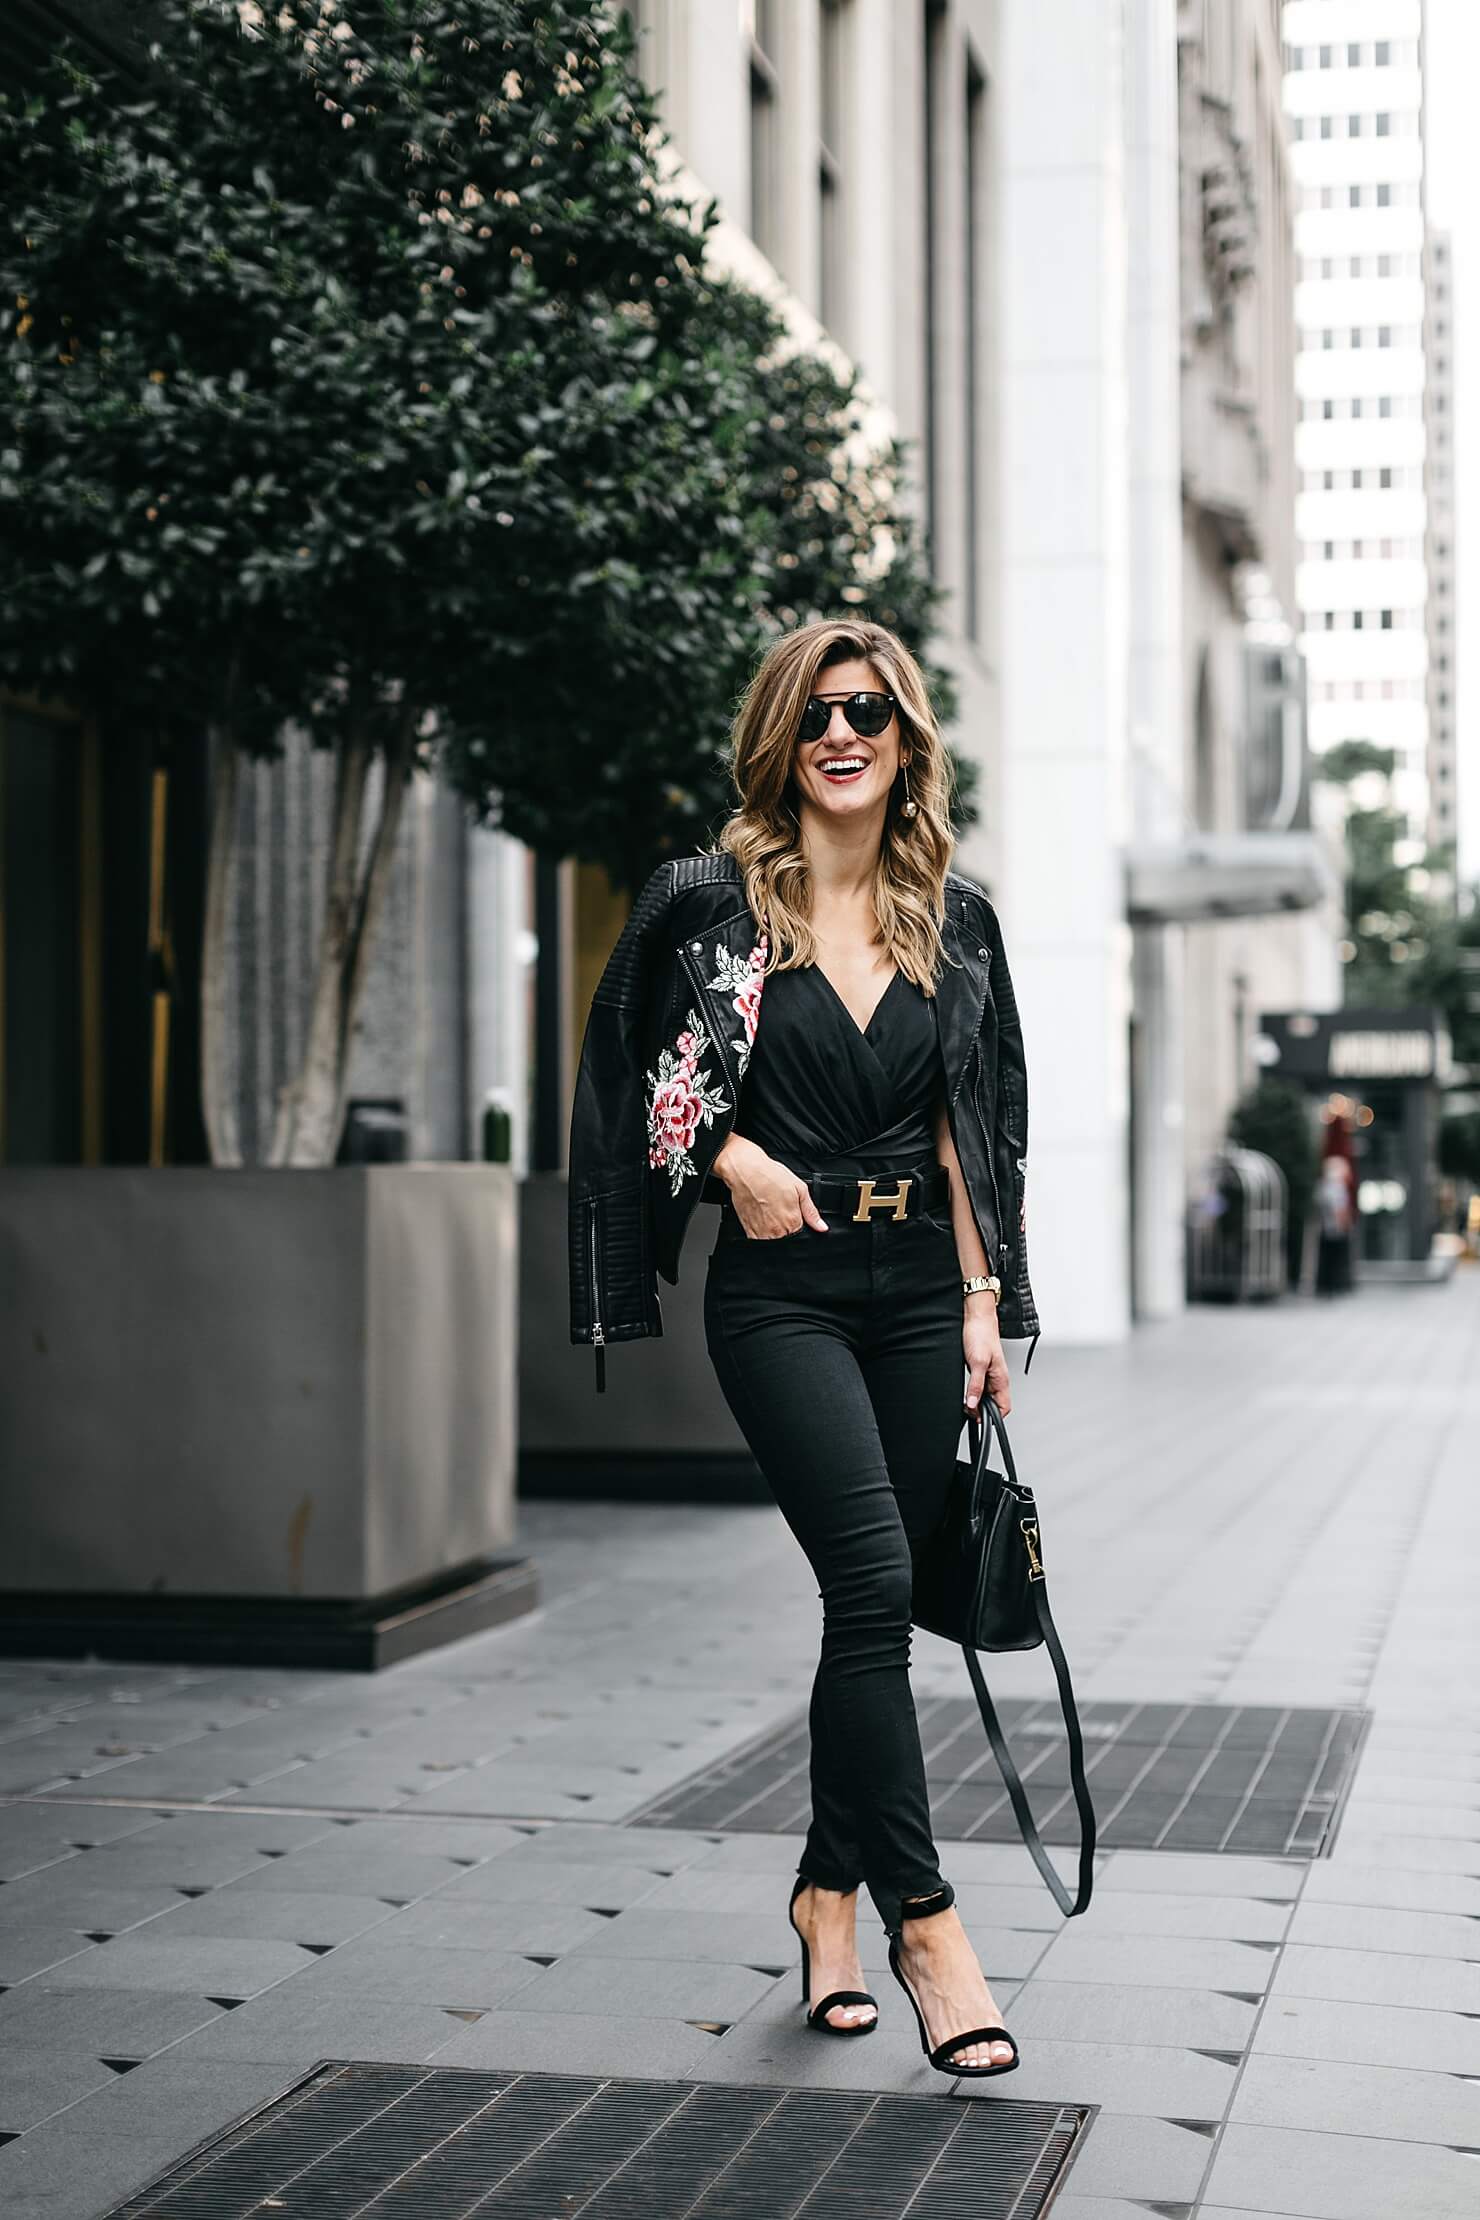 all black bodysuit outfit with embroidered leather jacket, black jeans, statement belt, and heels